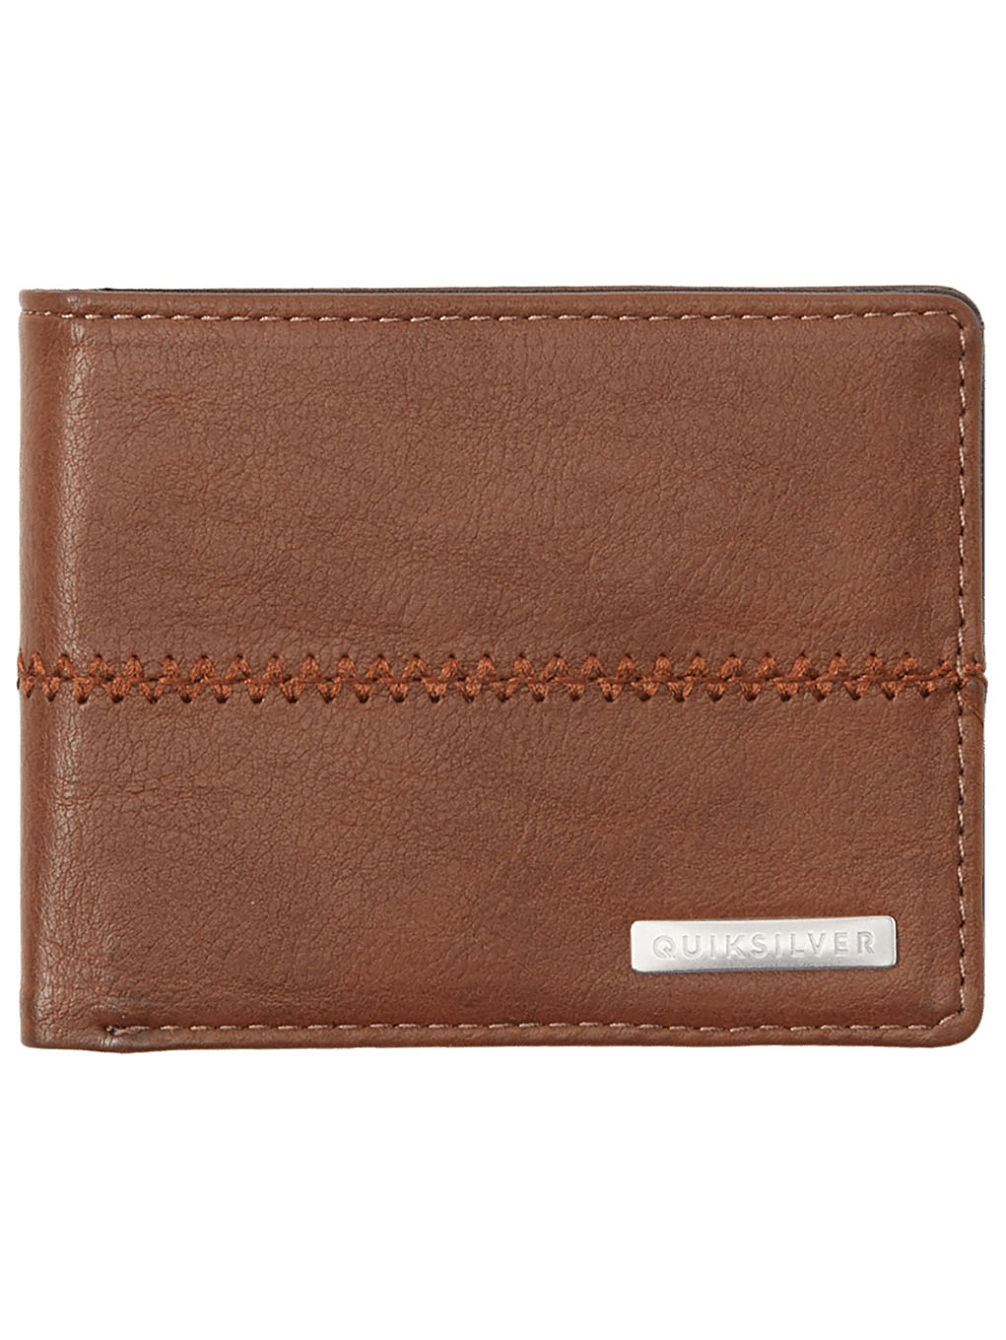 Stitchy 3 Wallet